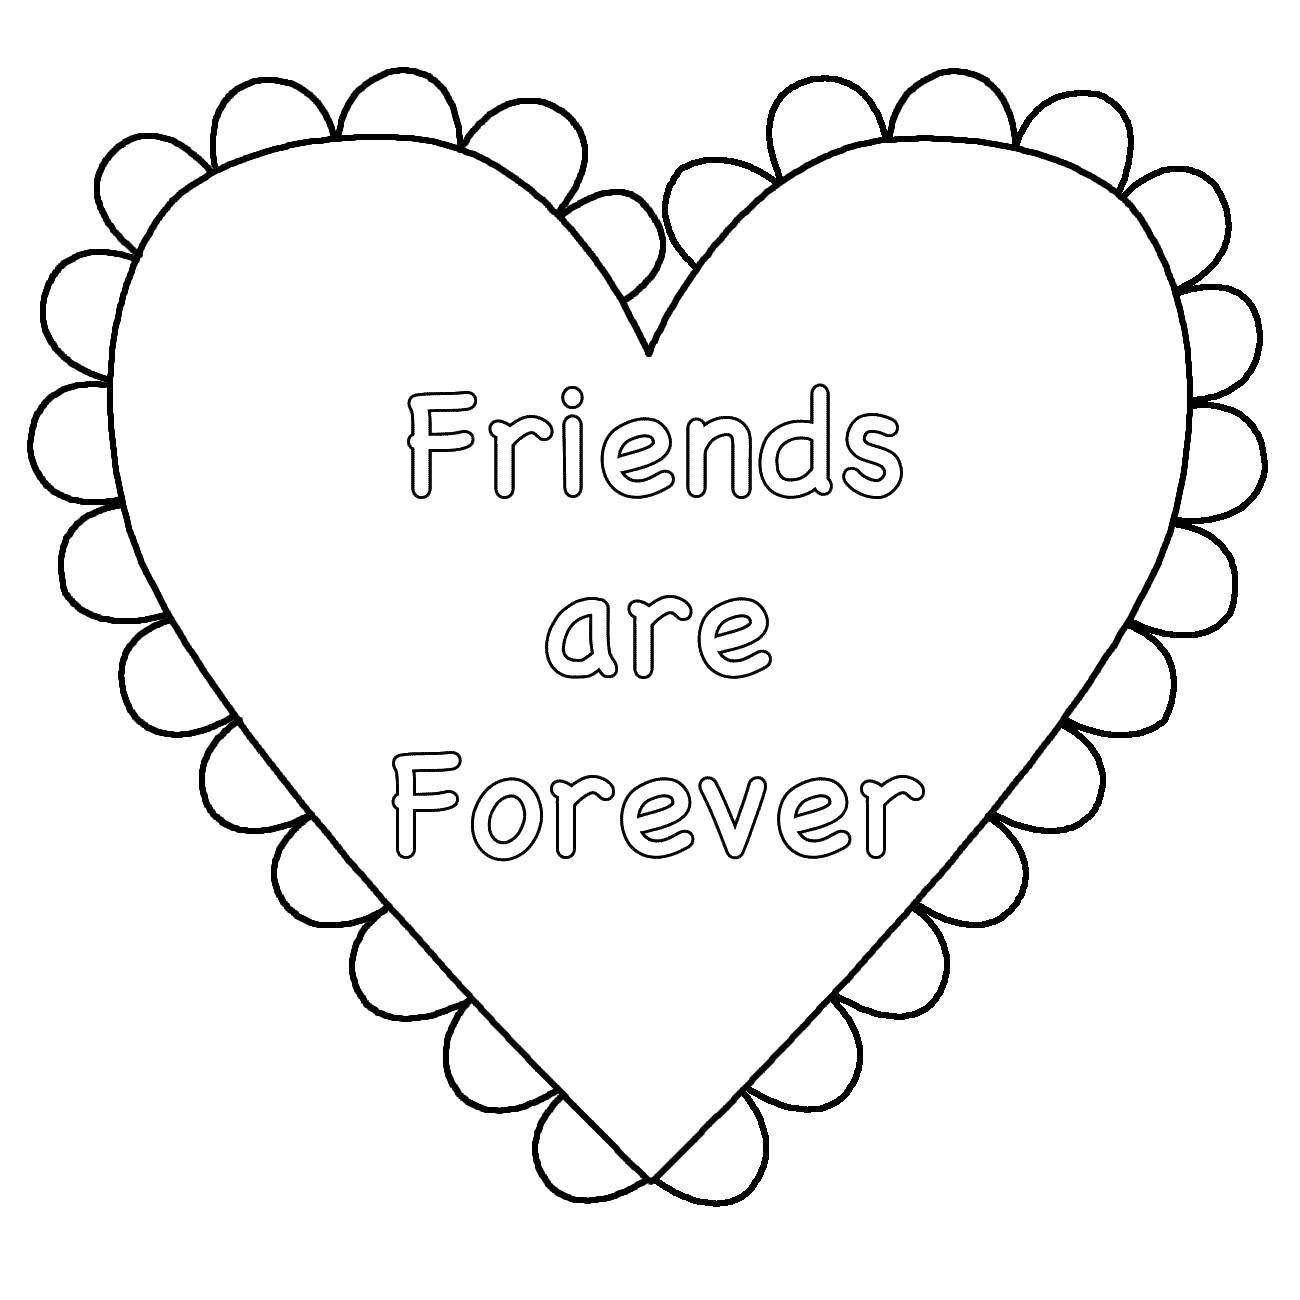 Coloring Friends forever. Category coloring. Tags:  Labels, patterns.